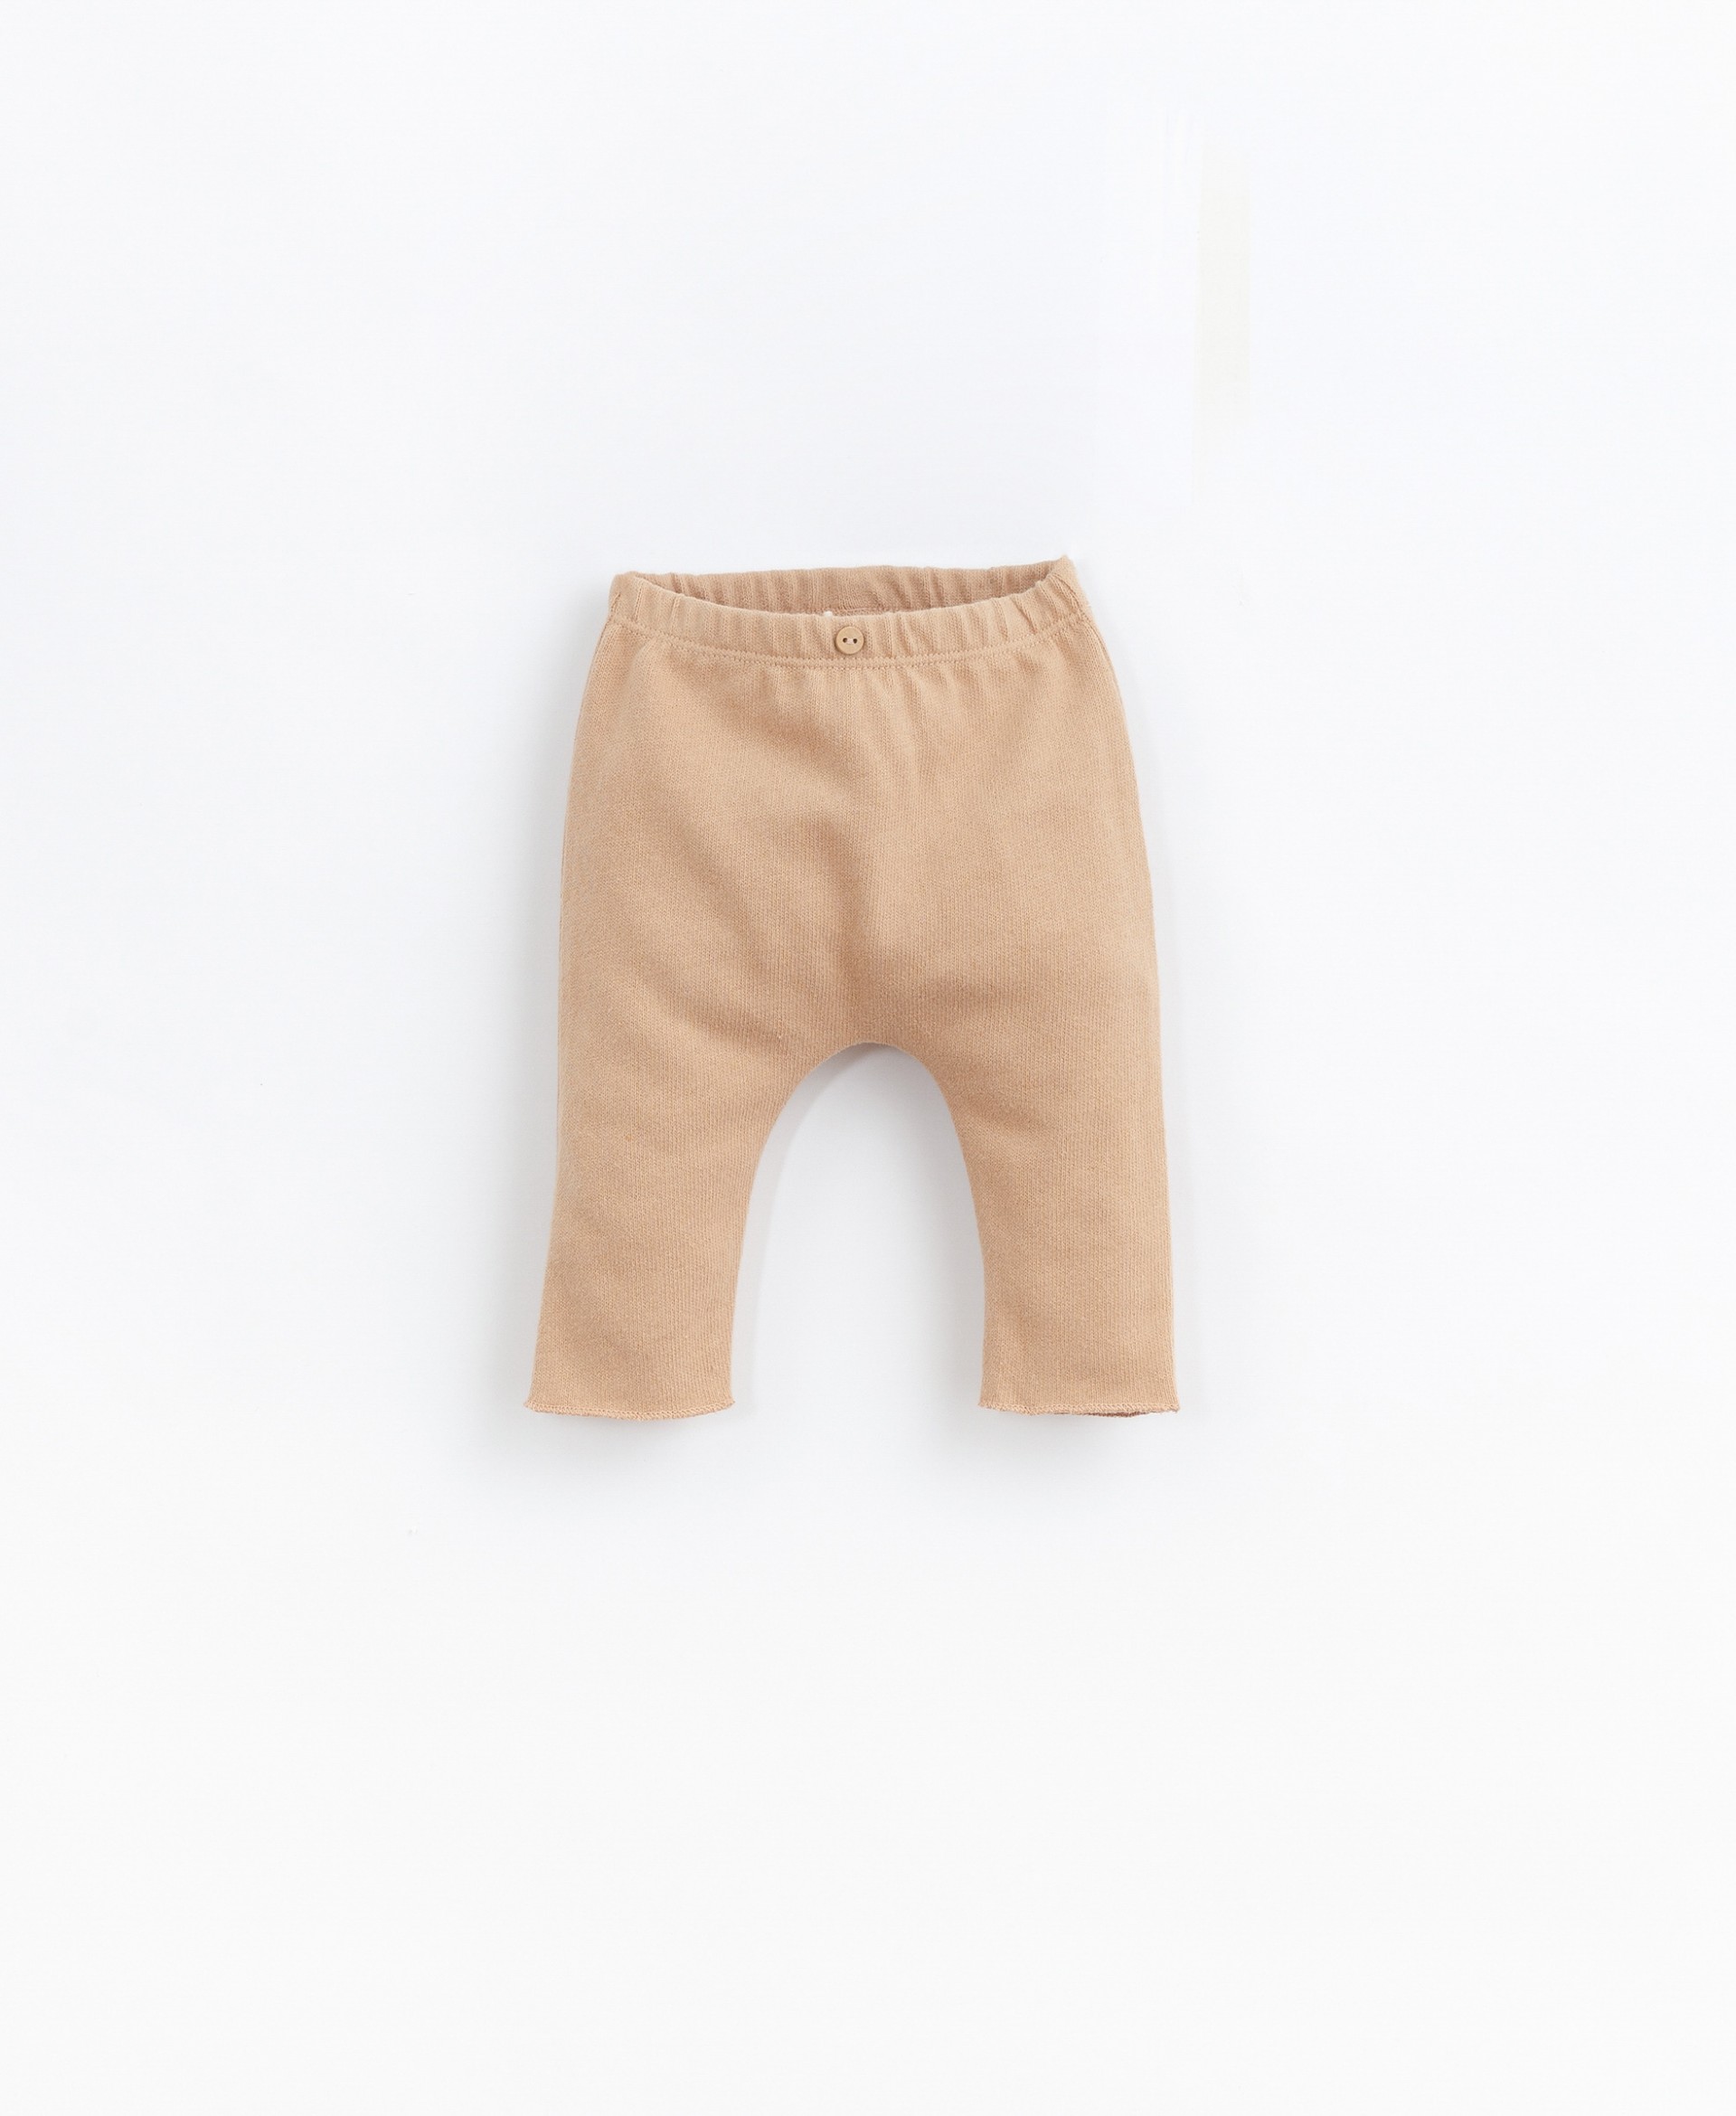 Pants with decorative wooden button | Basketry